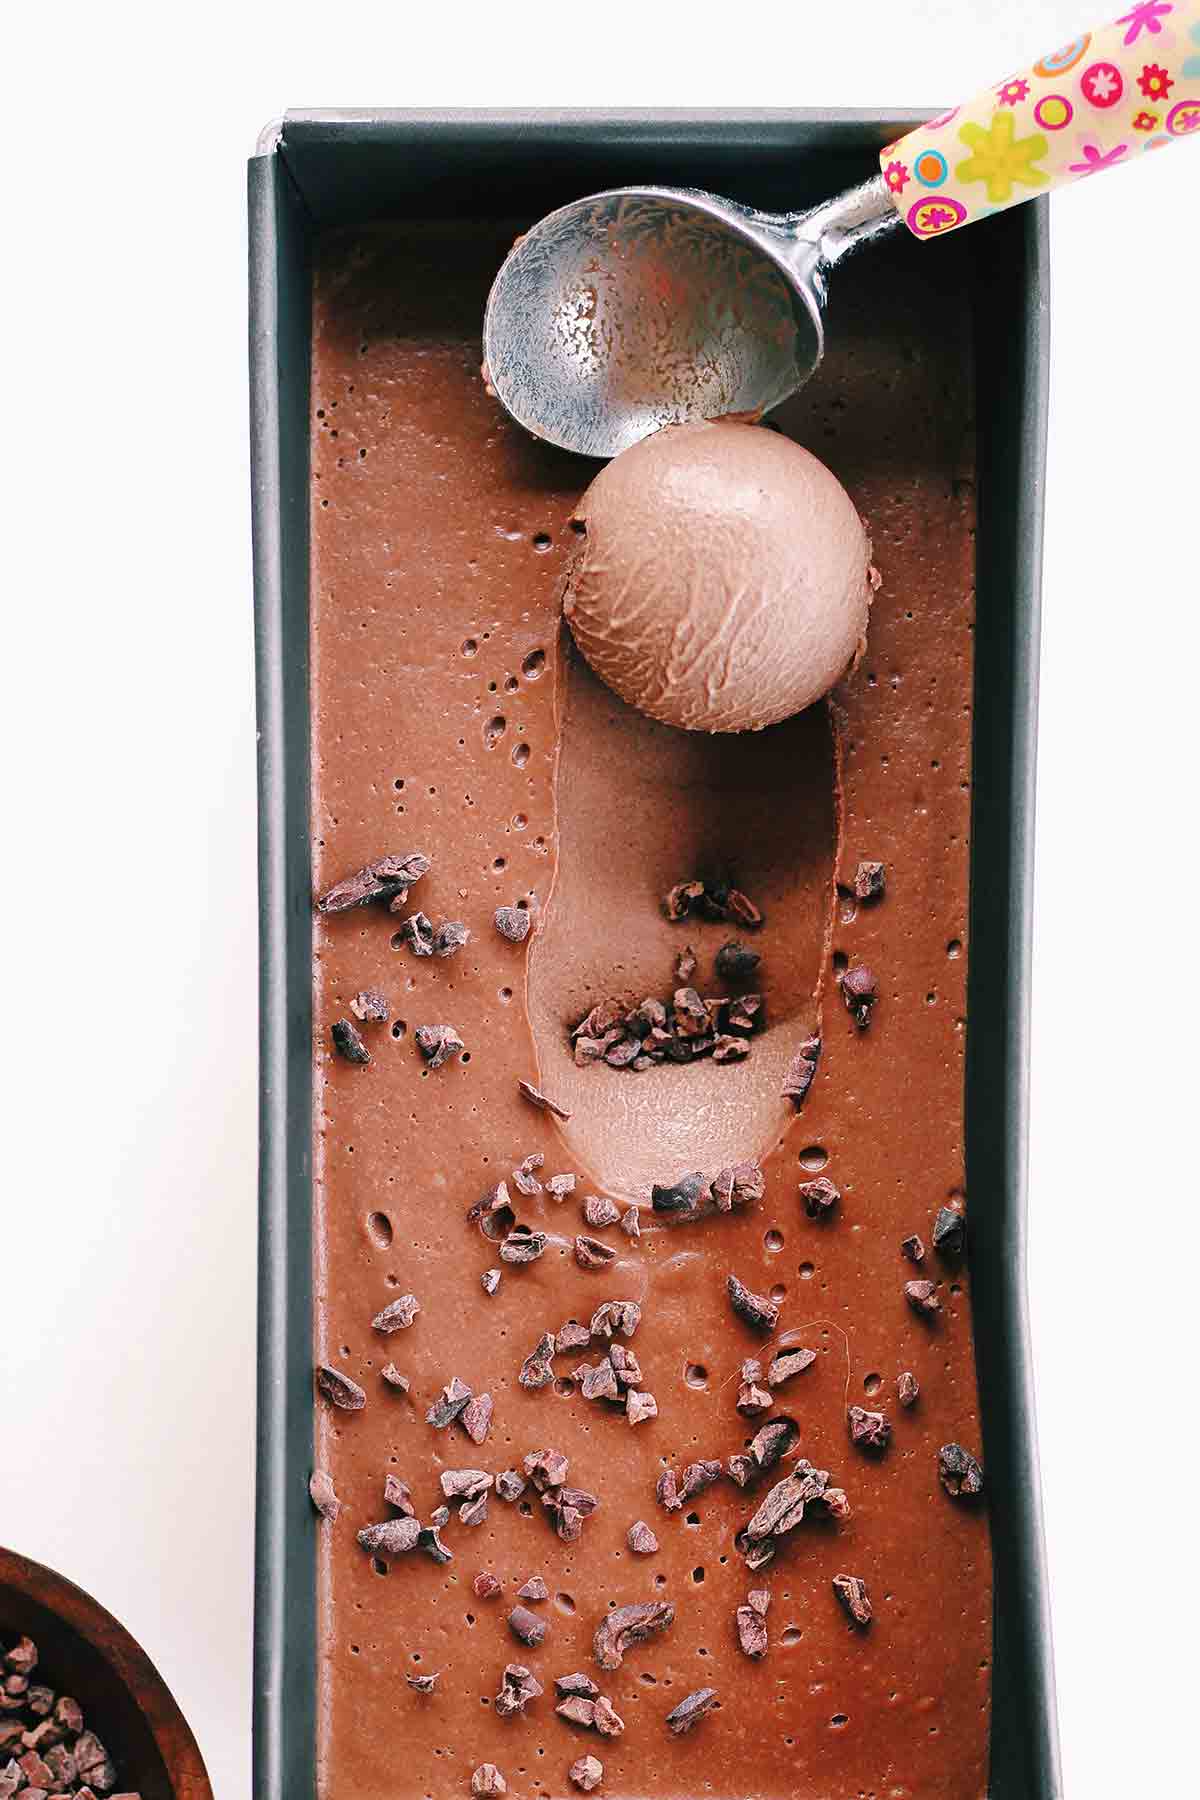 Chocolate Gelato In A Tub With A Scoop Being Taken Out